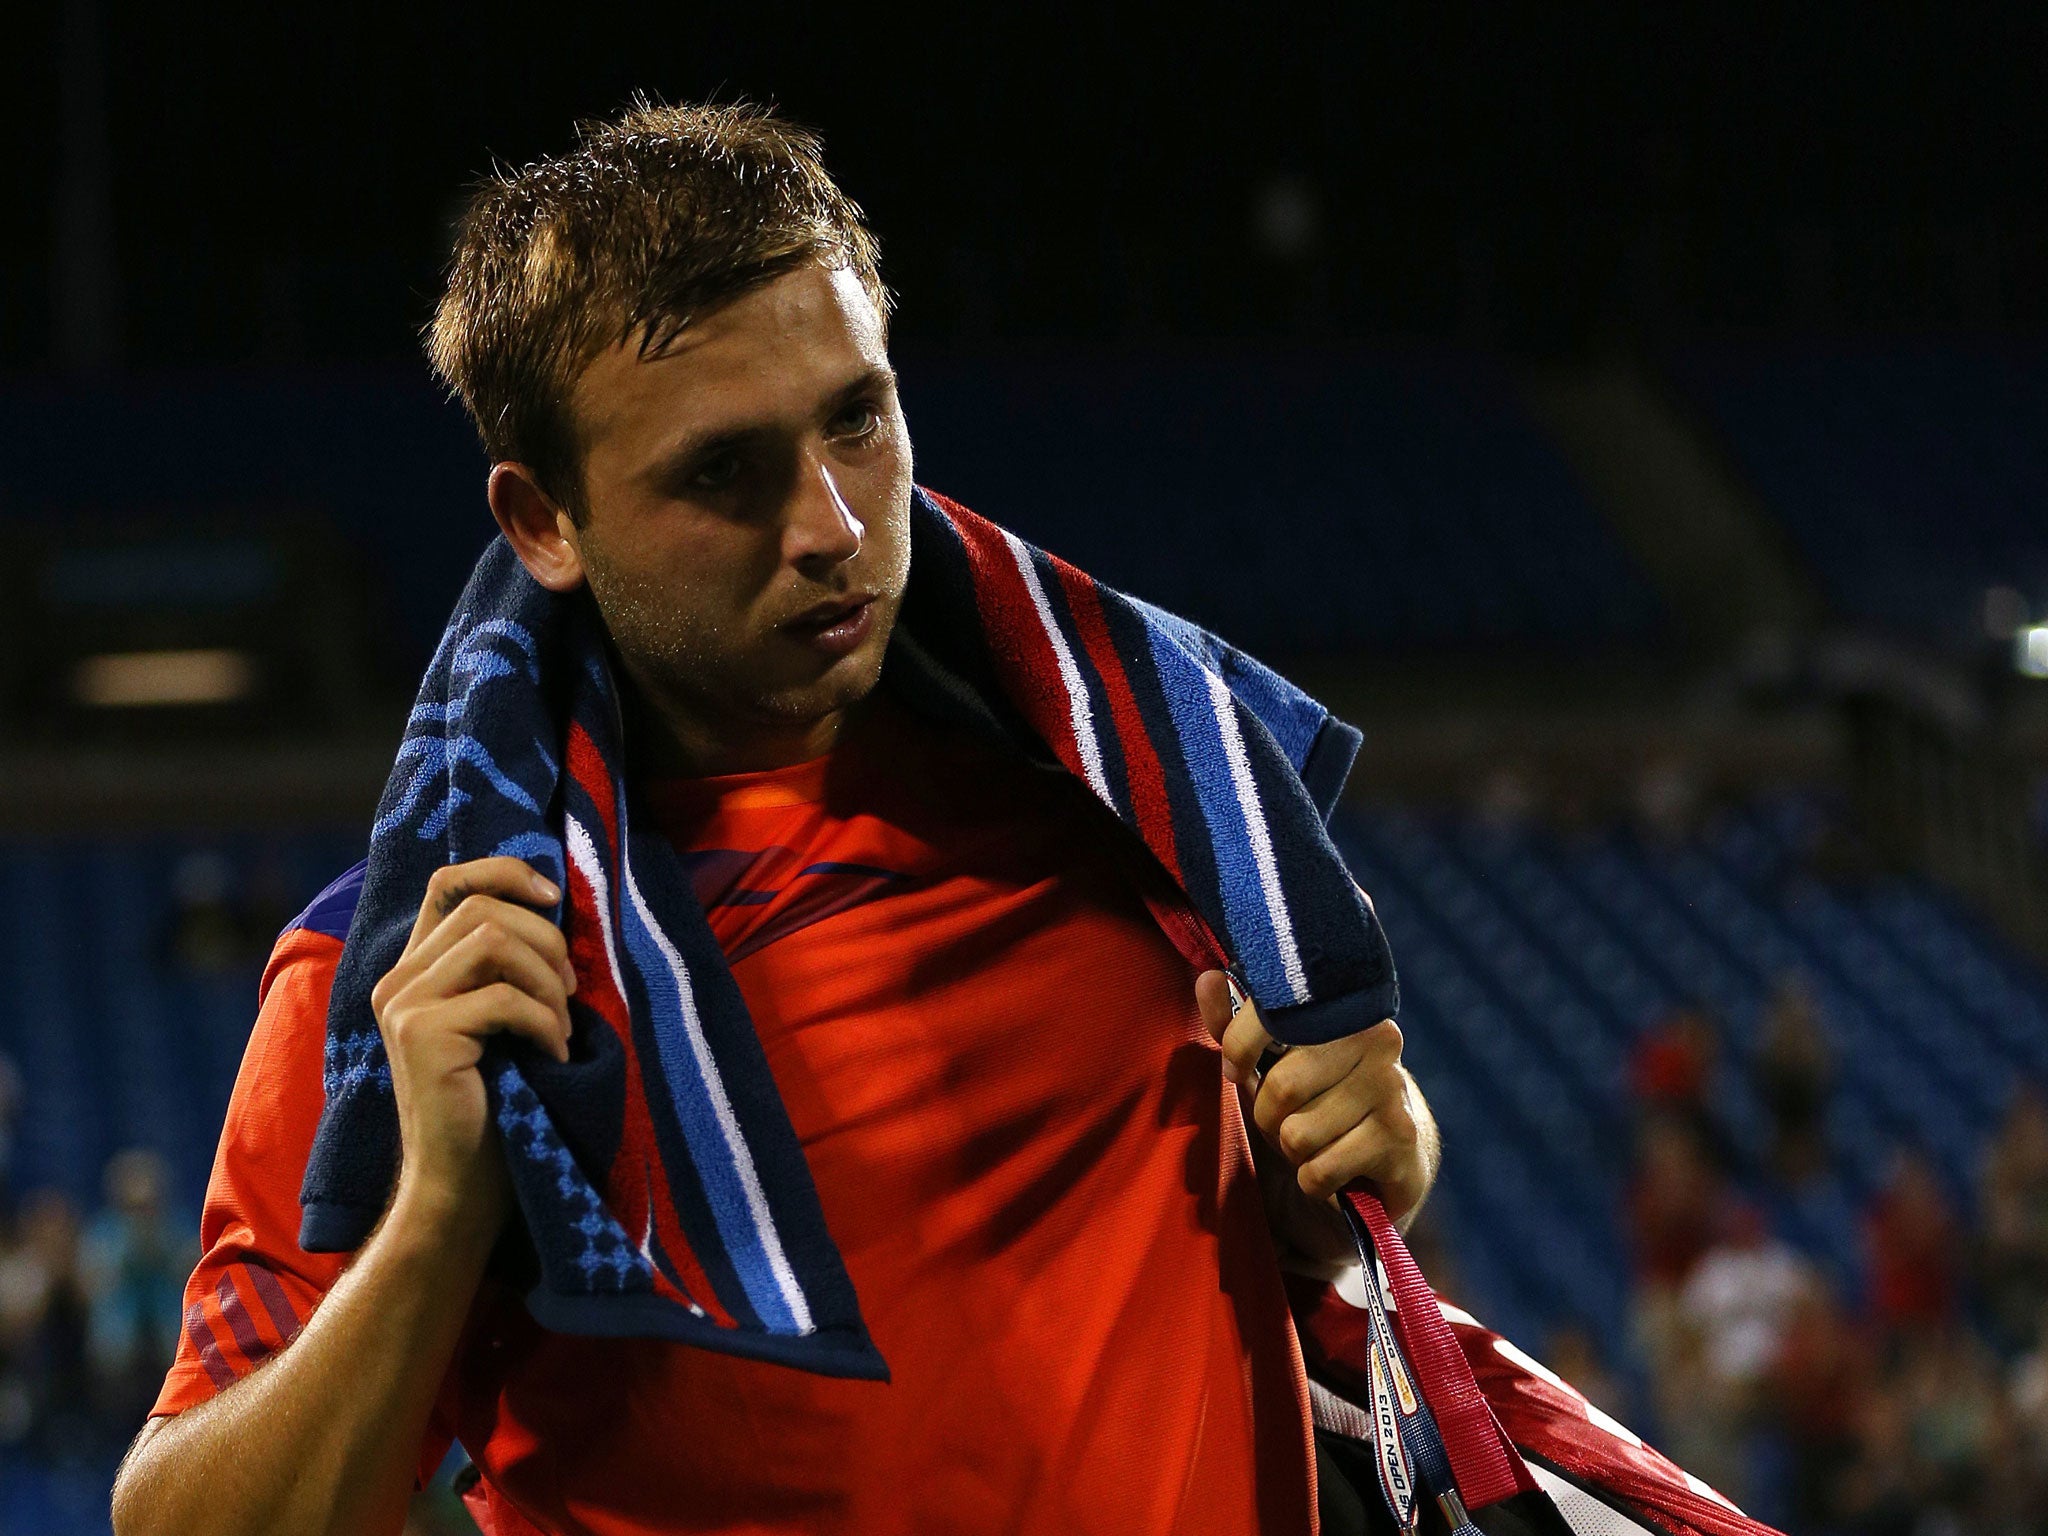 Dan Evans is expected to climb the rankings after his success